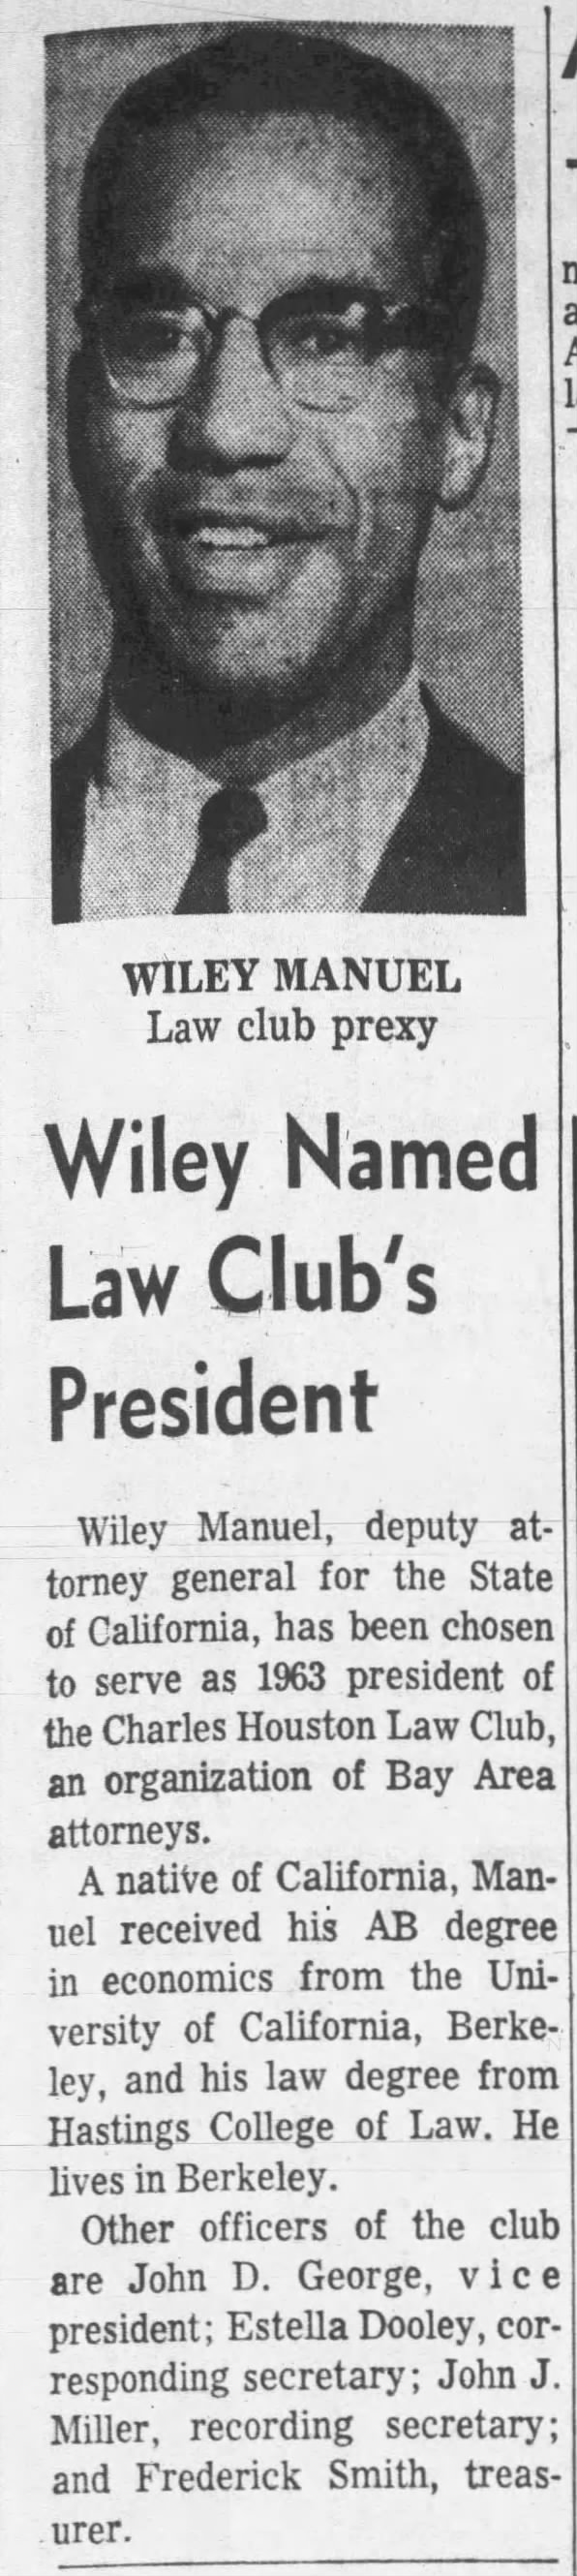 Wiley - pres. of Charles Houston law club